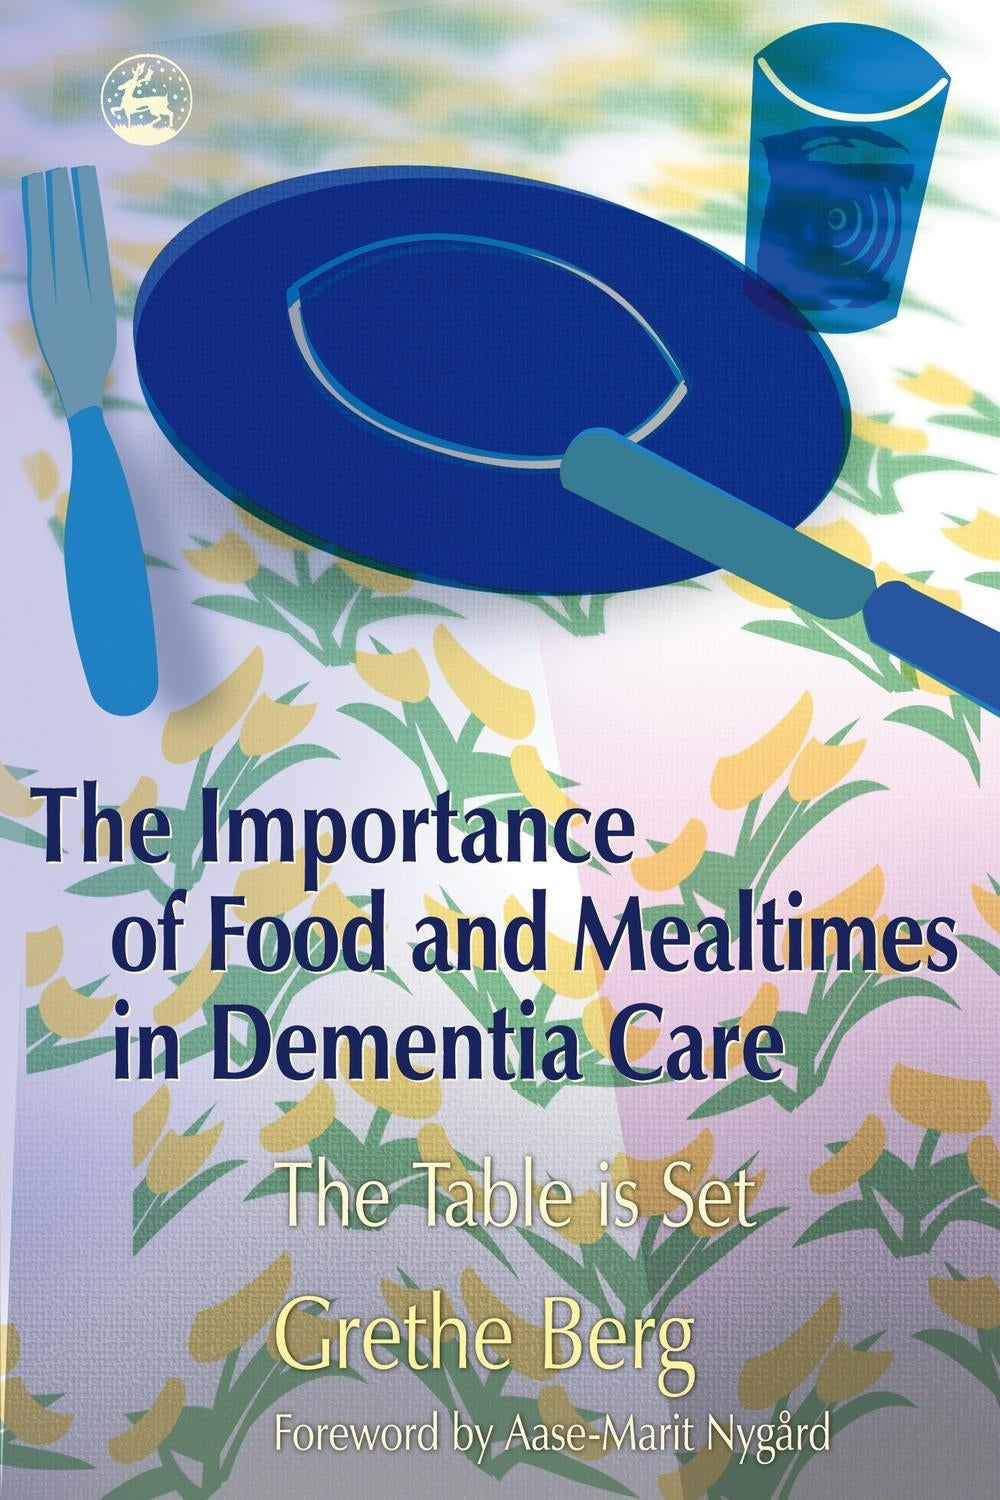 The Importance of Food and Mealtimes in Dementia Care by Grethe Berg